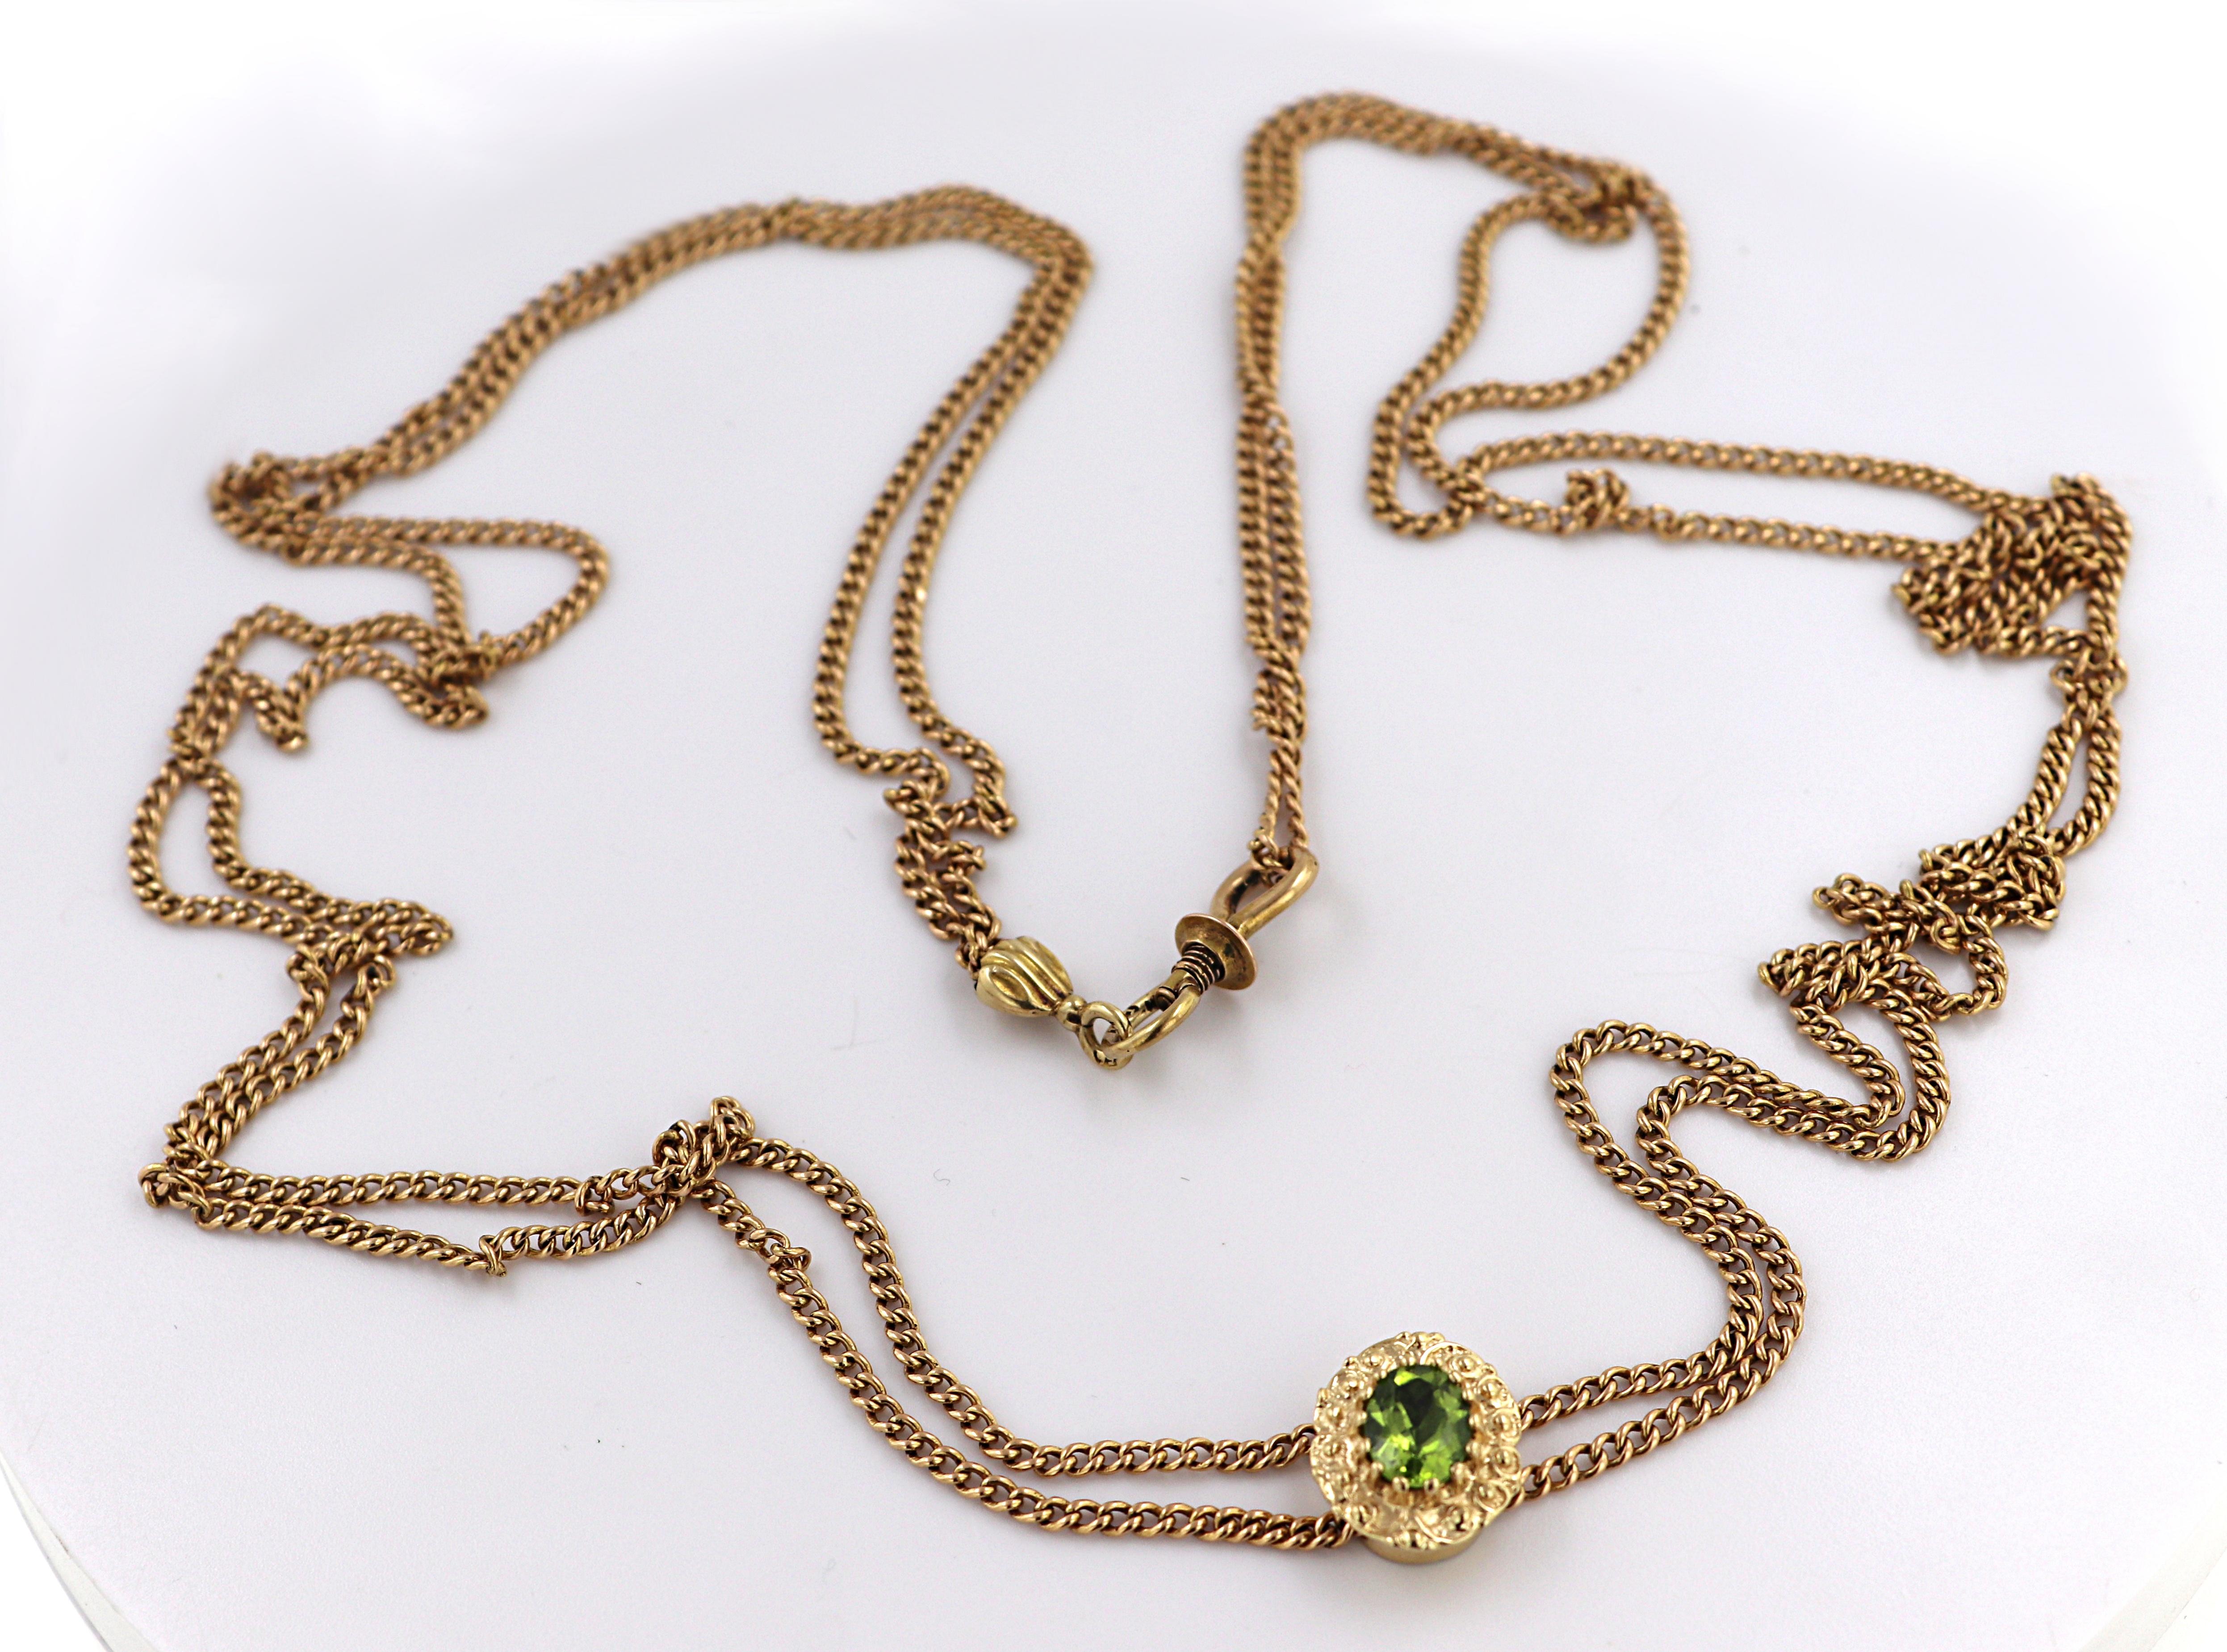 Featuring (1) oval peridot, 1.25 ct., set in a 14k yellow gold Victorian style oval slide, 14 X 11 X 6.6 mm,
suspended from a 2 X .9 mm, flat curb link chain, completed by a screw locking hinged hook clasp,
forming a 66-inch necklace, Gross weight